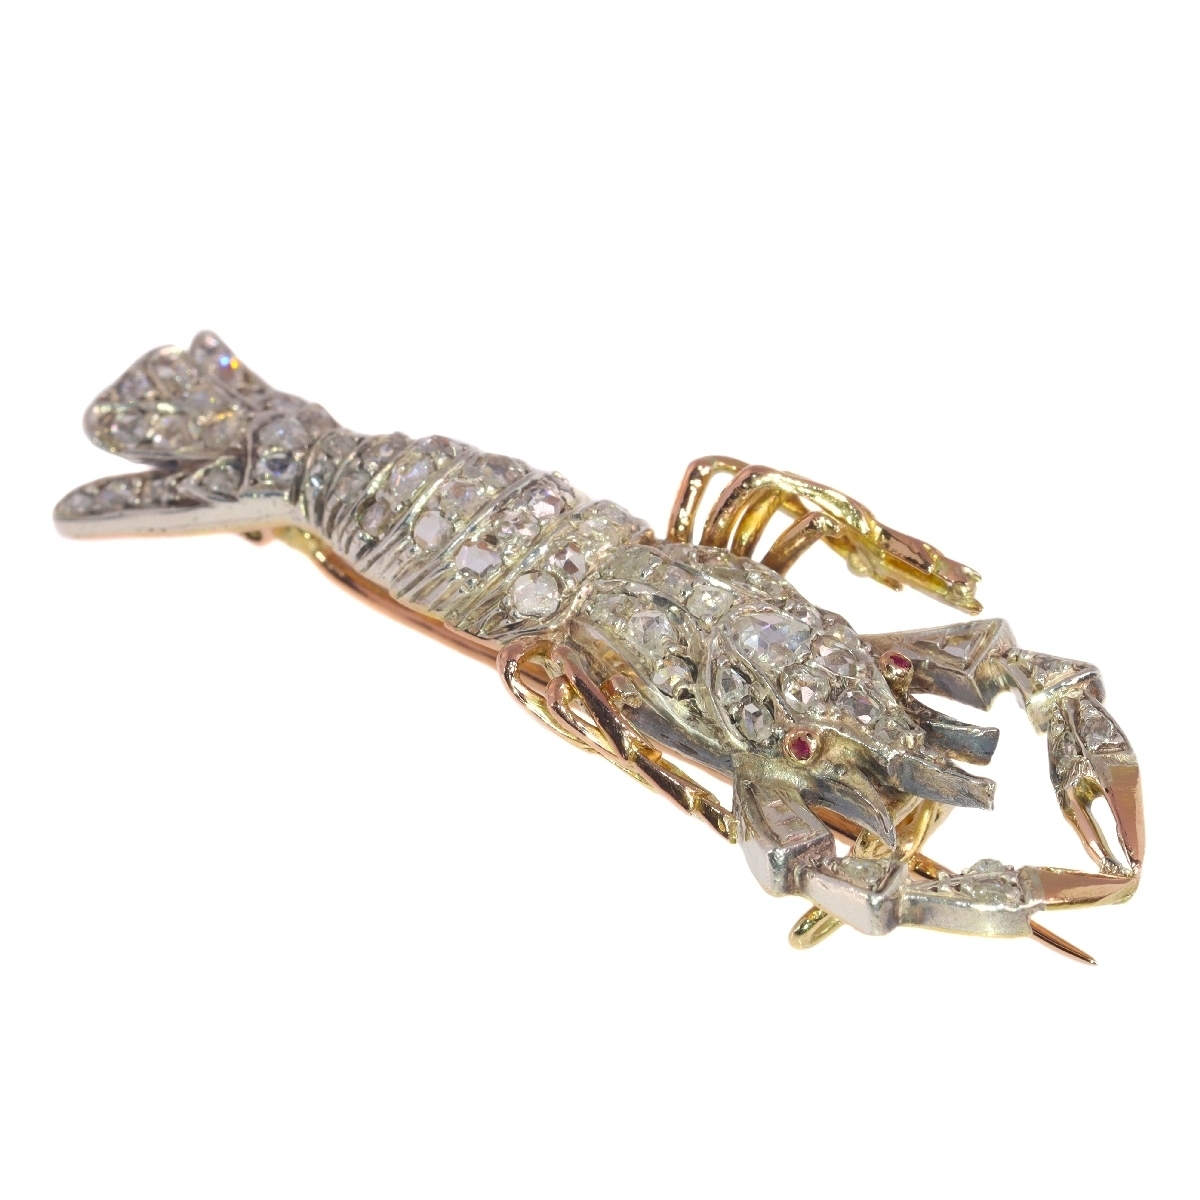 Antique gold and silver crayfish brooch fully embelished with rose cut diamonds